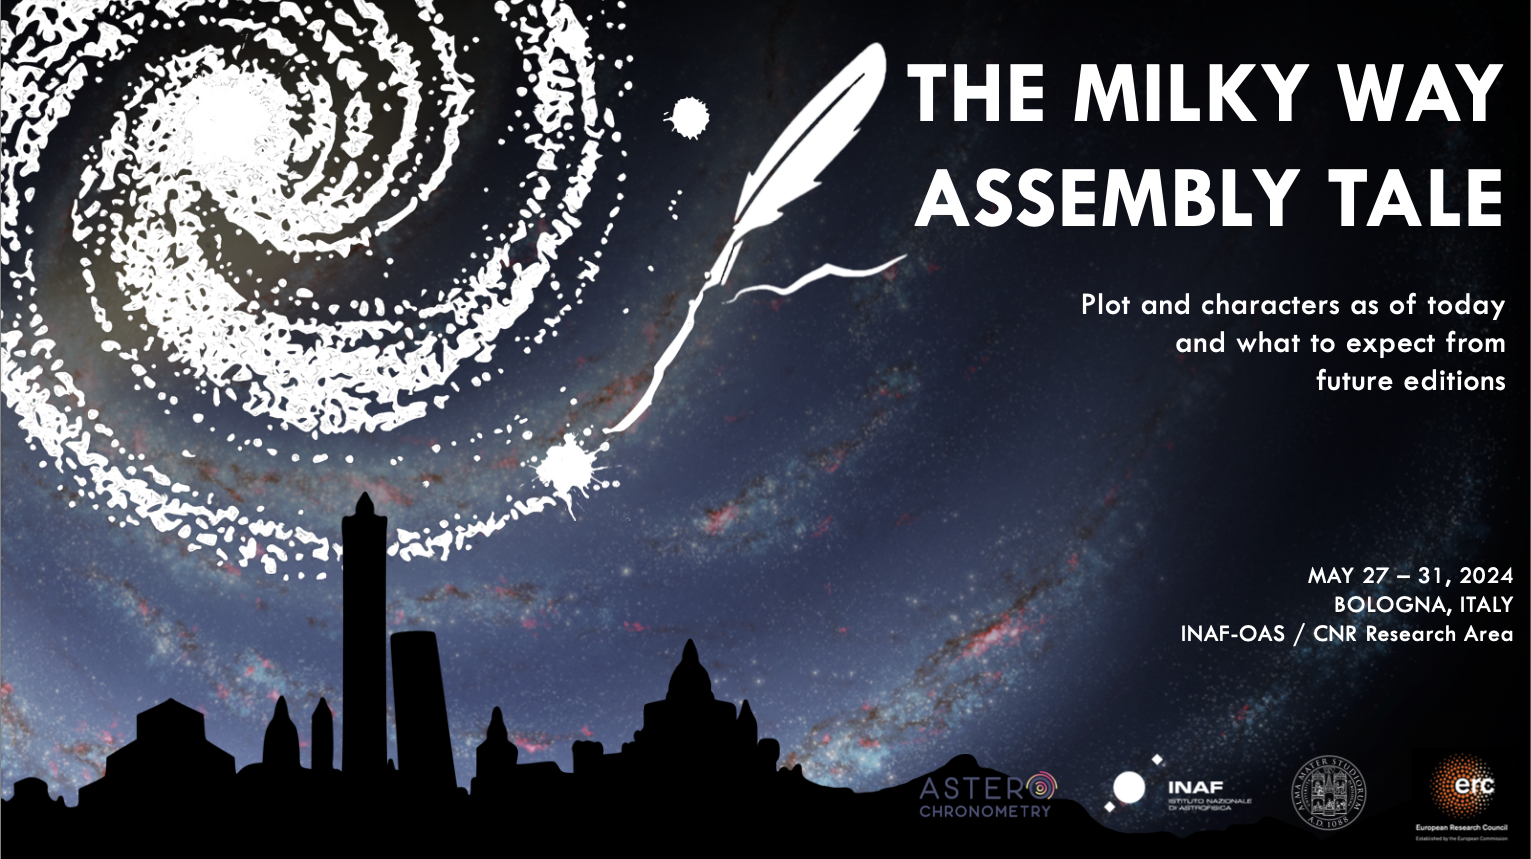 The Milky Way Assembly Tale - Bologna 27-31 May 2024